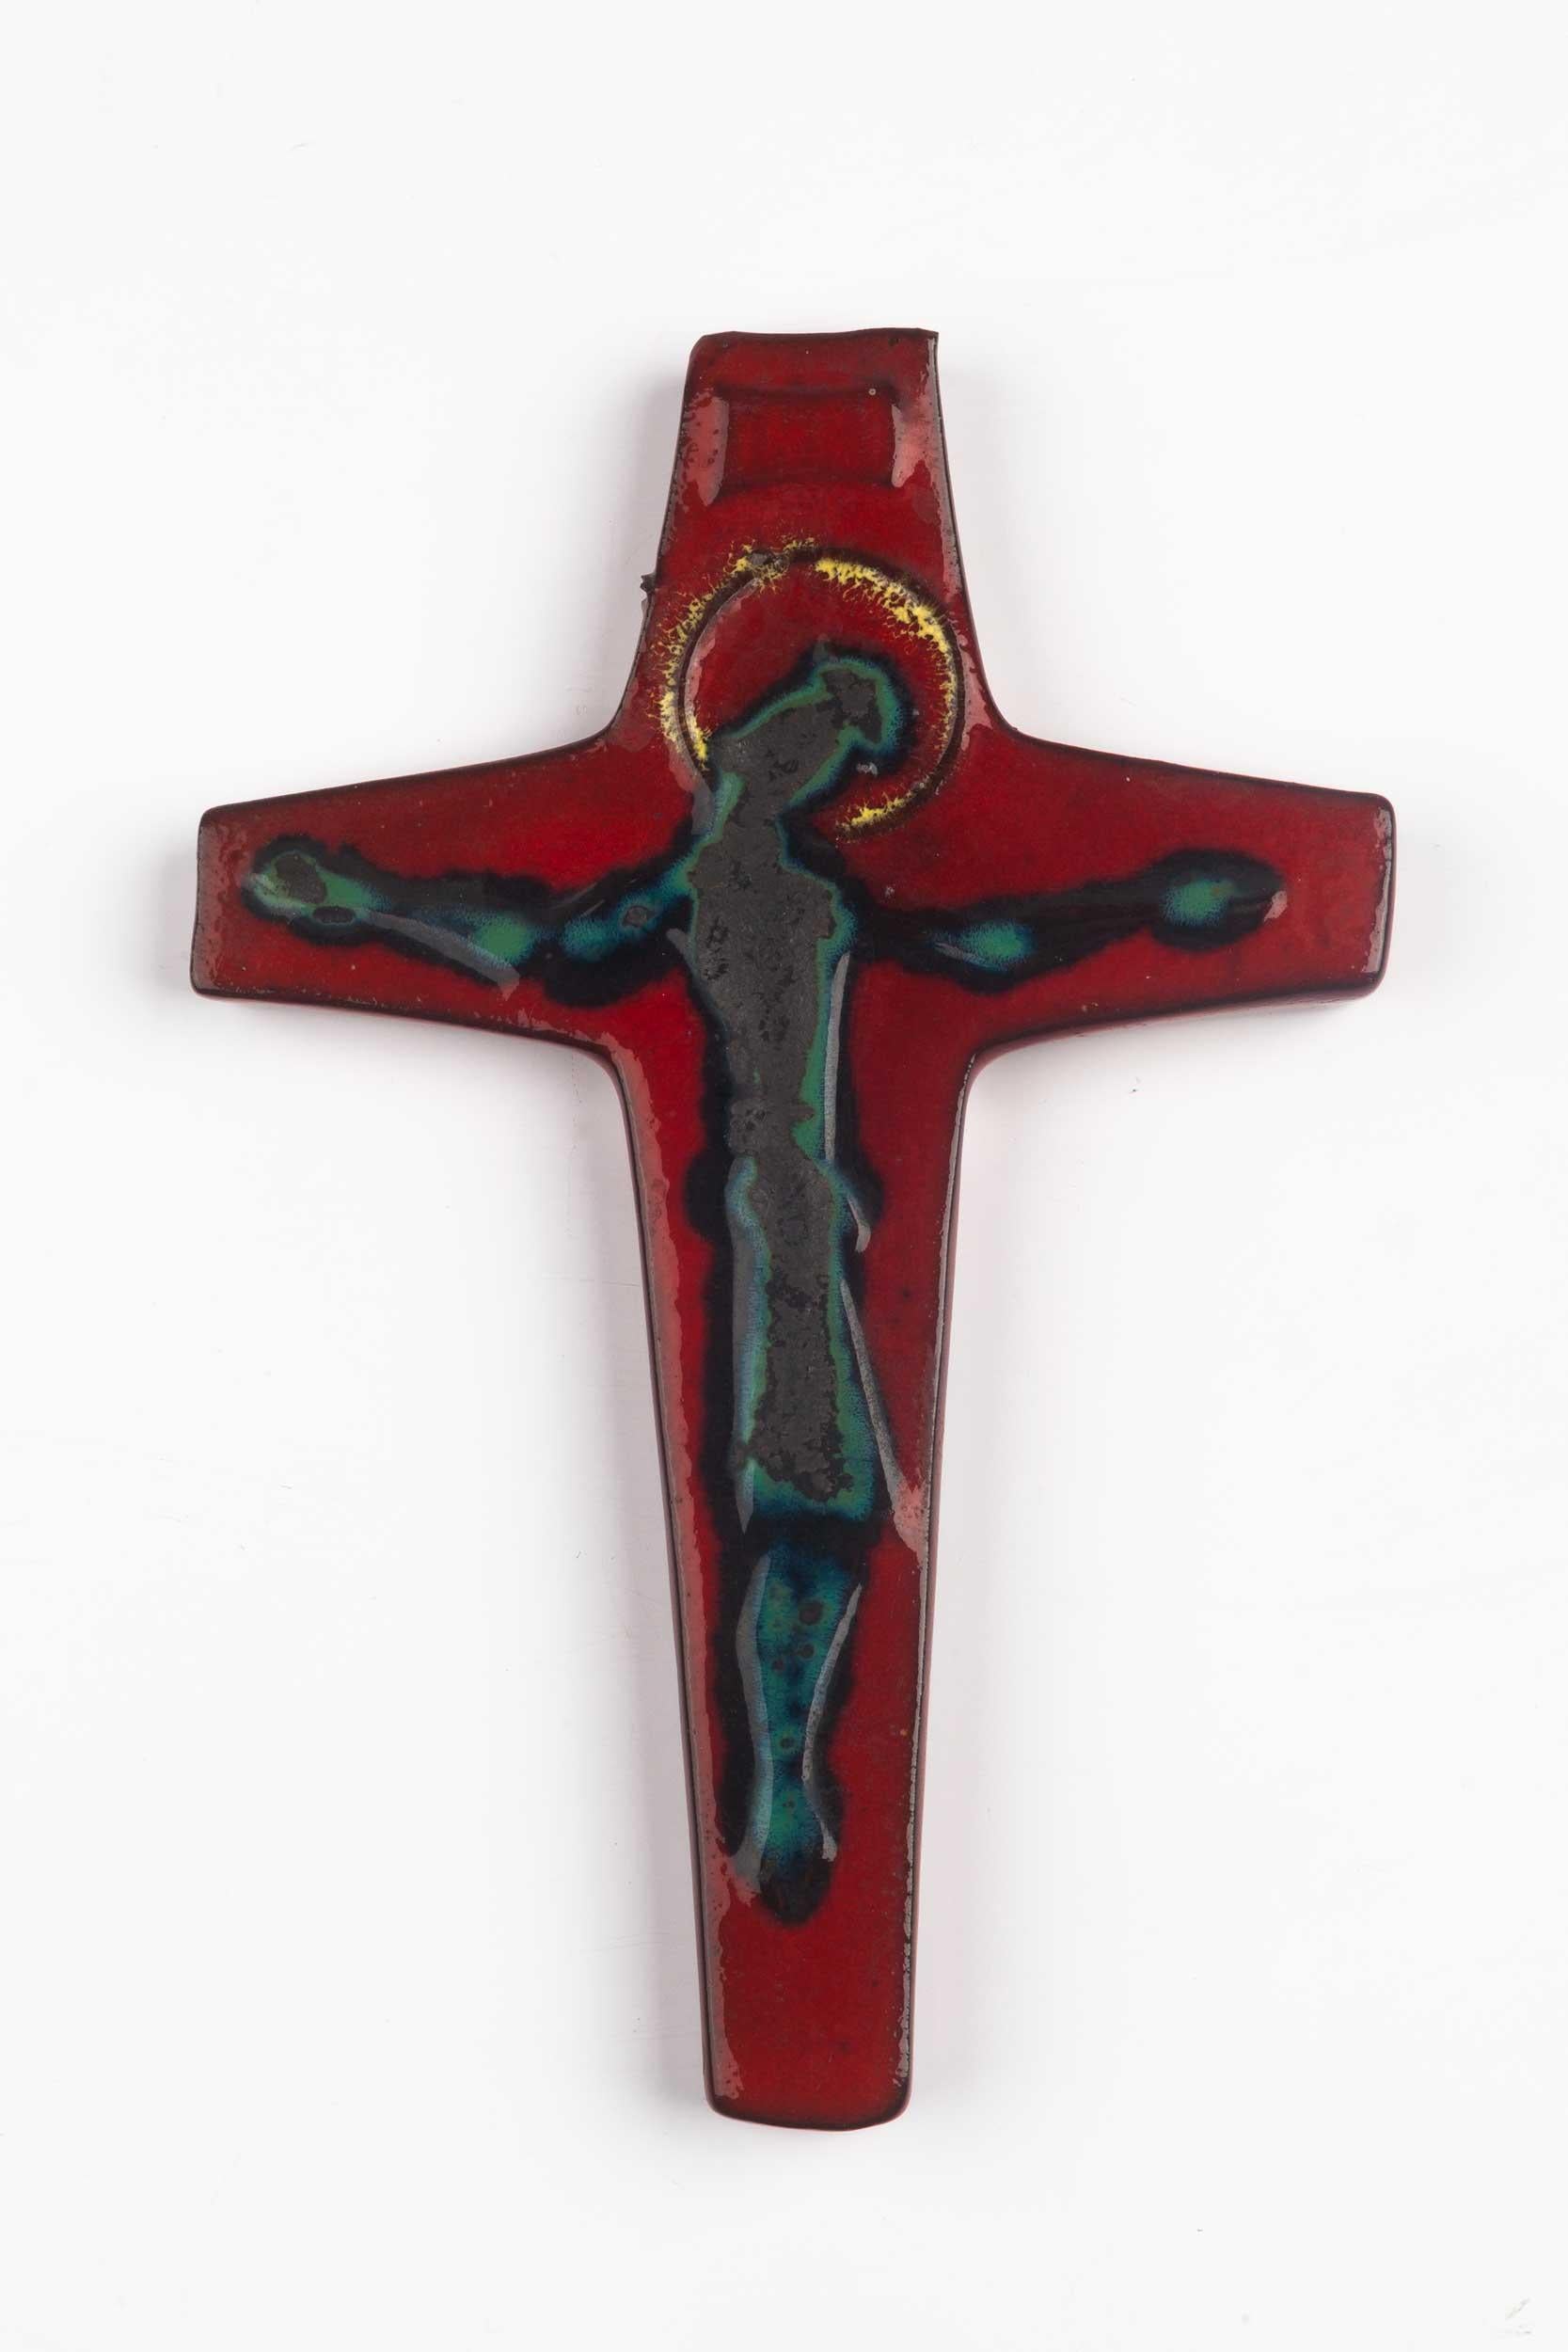 European mid-century crucifix in glazed ceramic, hand-painted in deep red and slate grey with mysterious christ figure and gold halo. A one-of-a-kind, handcrafted piece that is part of a large collection of crosses made by Belgian artisan potters